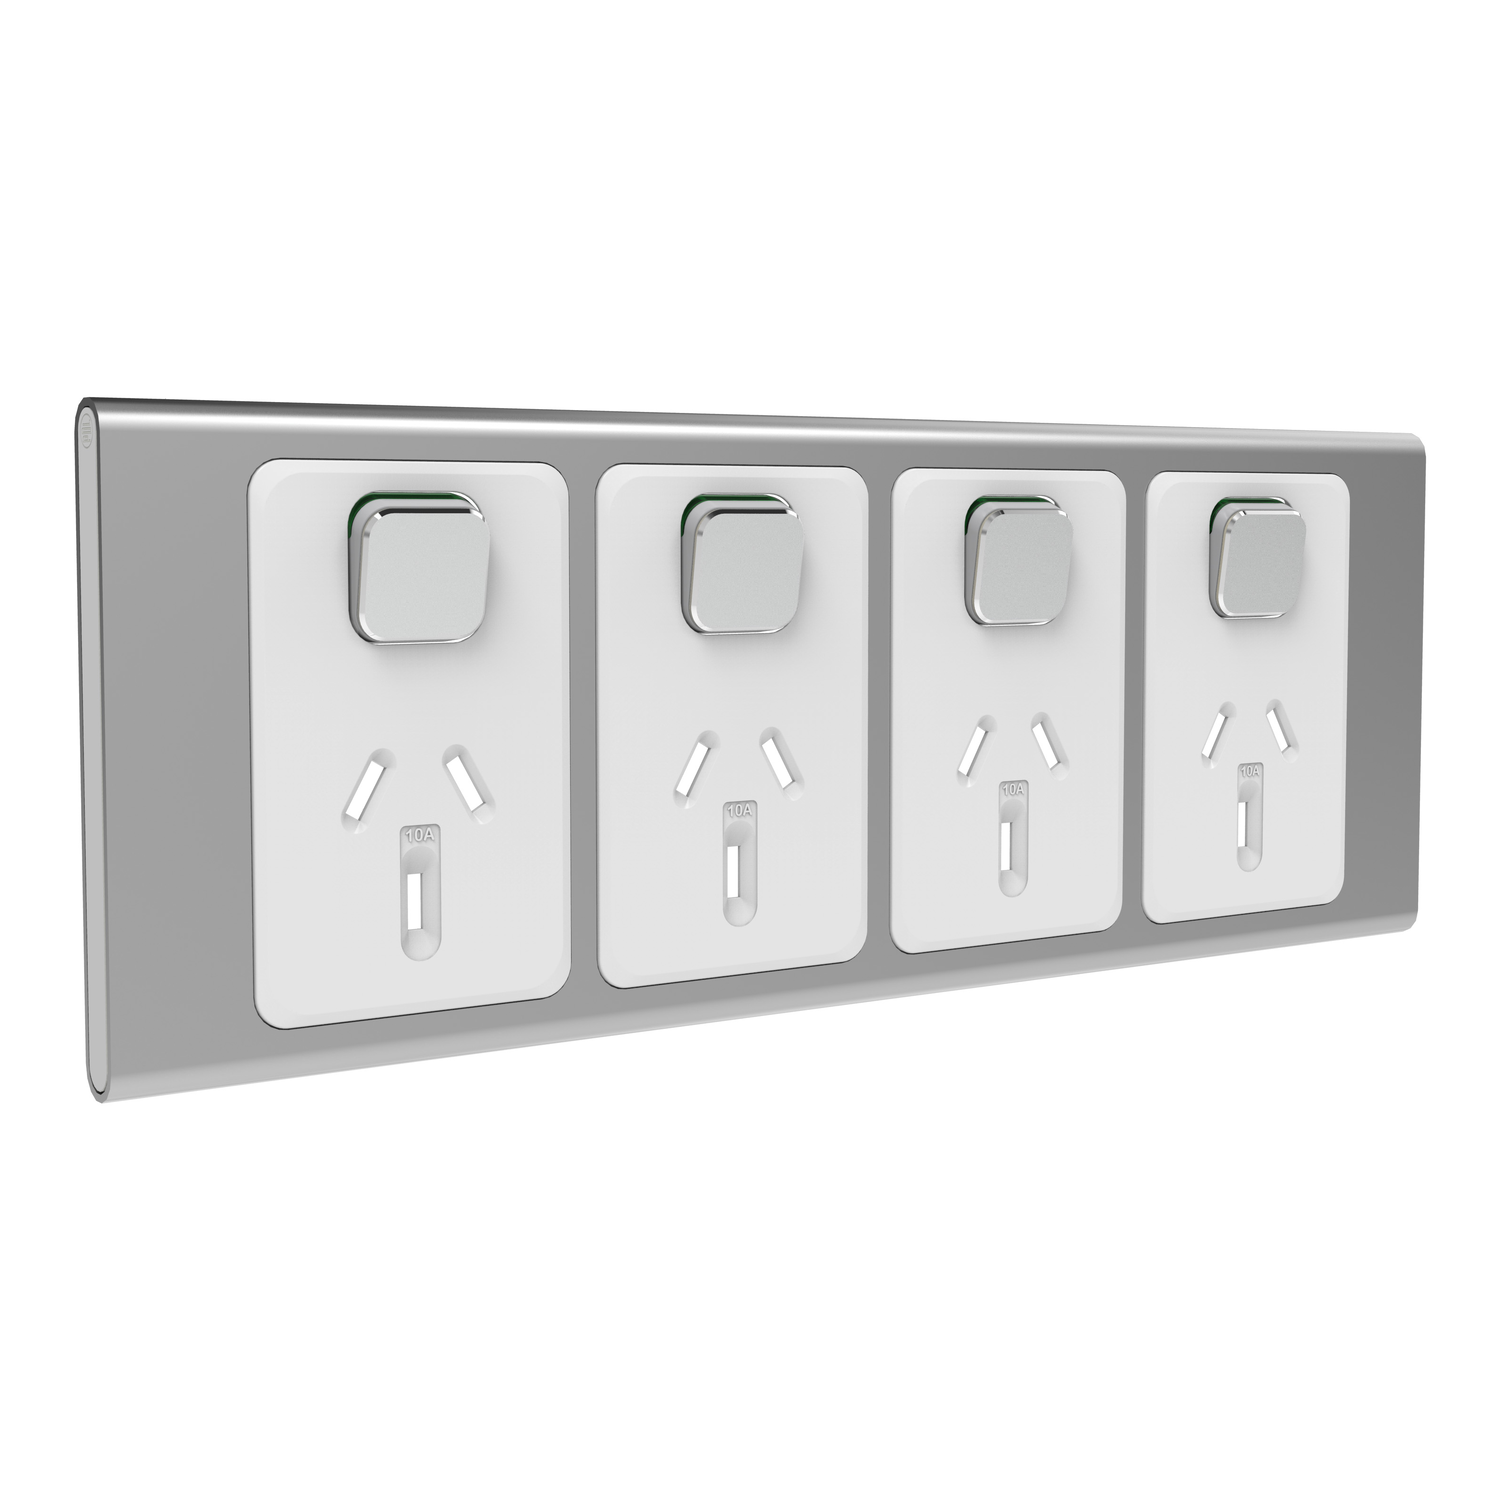 PDL Iconic Styl - Cover Plate Quad Socket - Silver